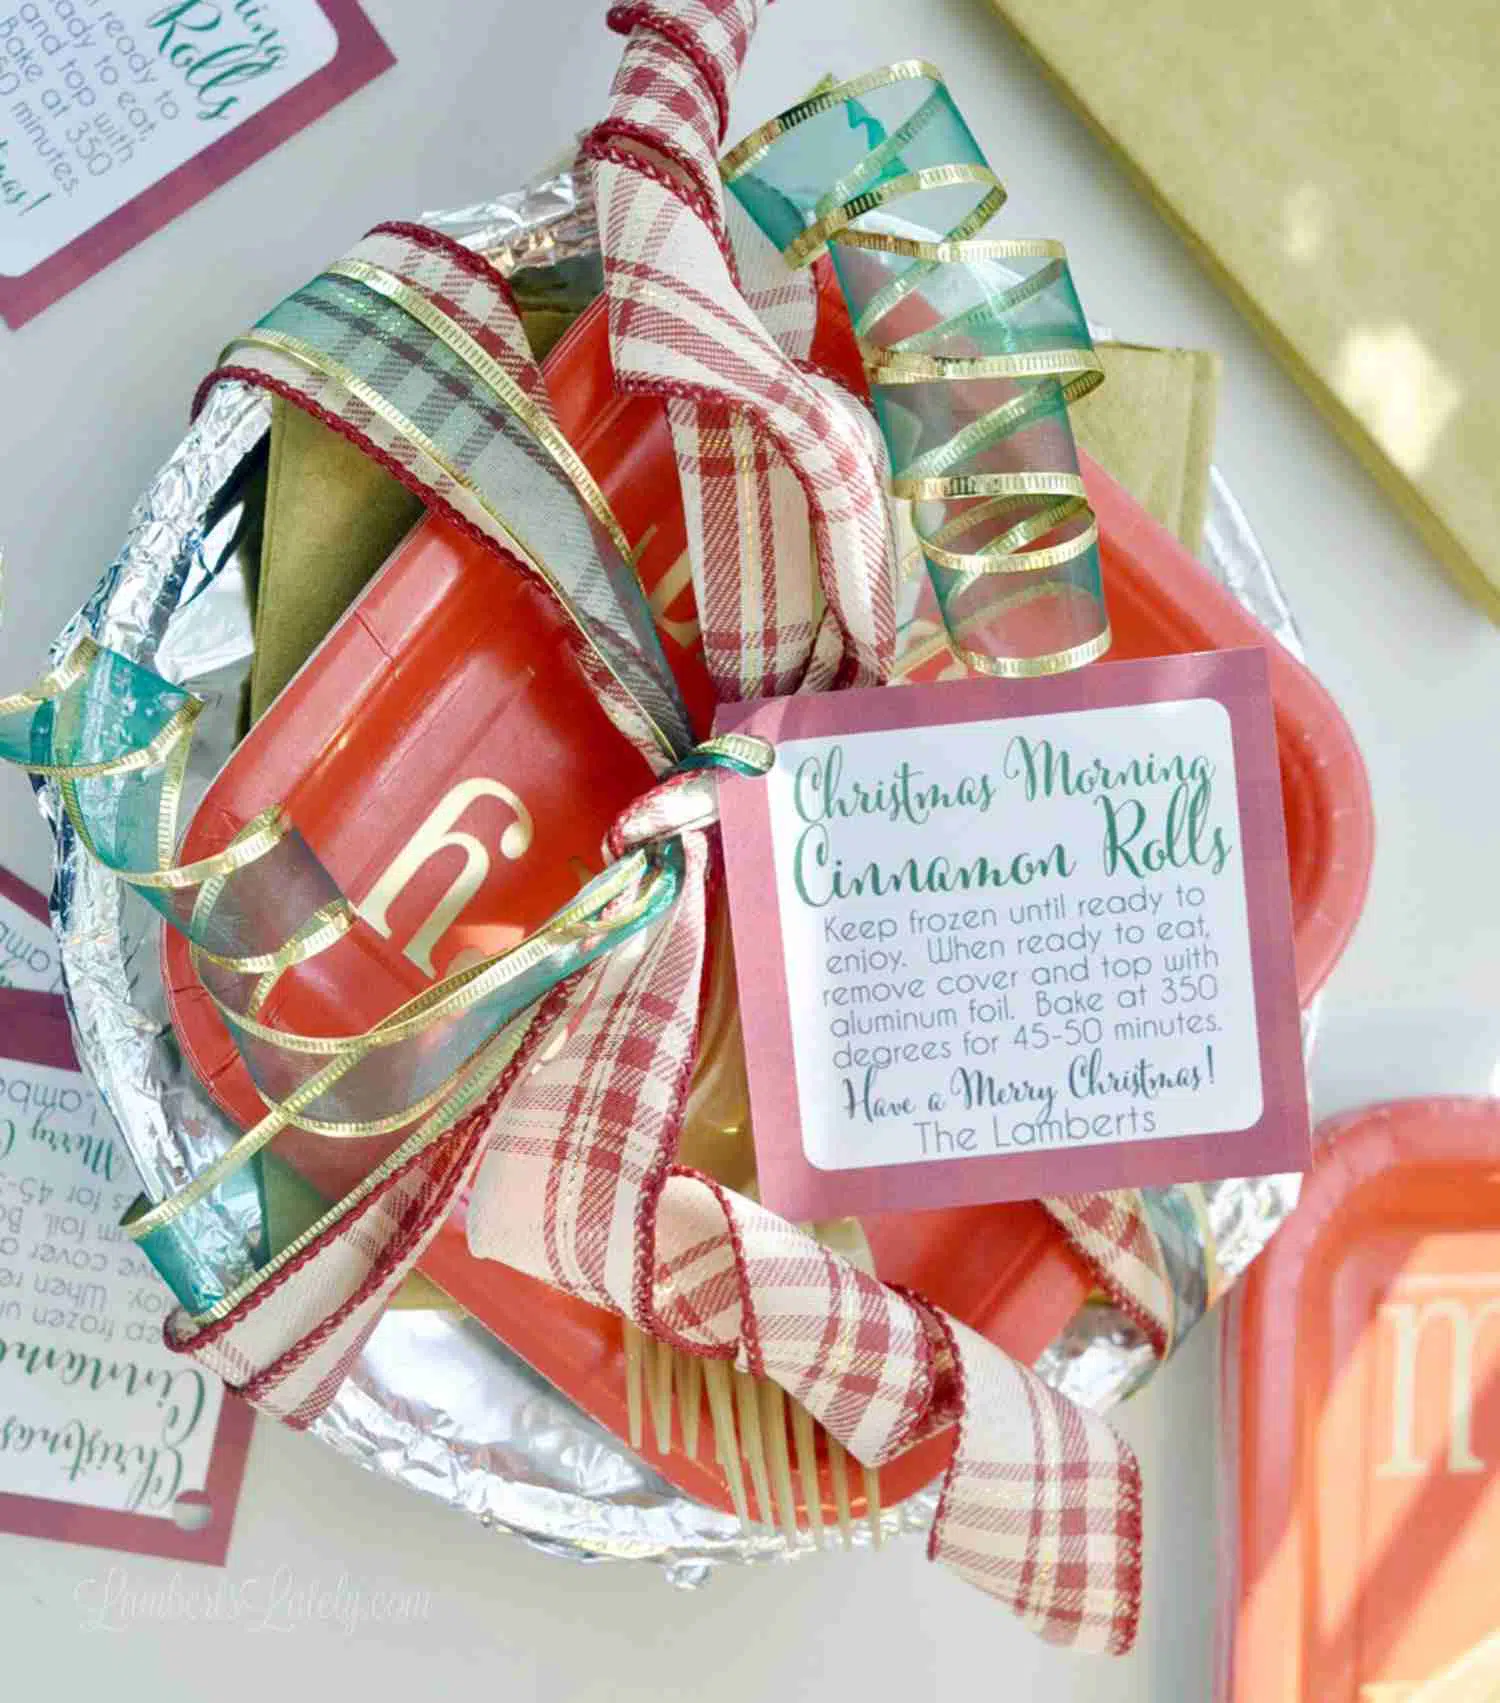 Christmas morning cinnamon rolls packaged in an aluminum dish with a gift tag